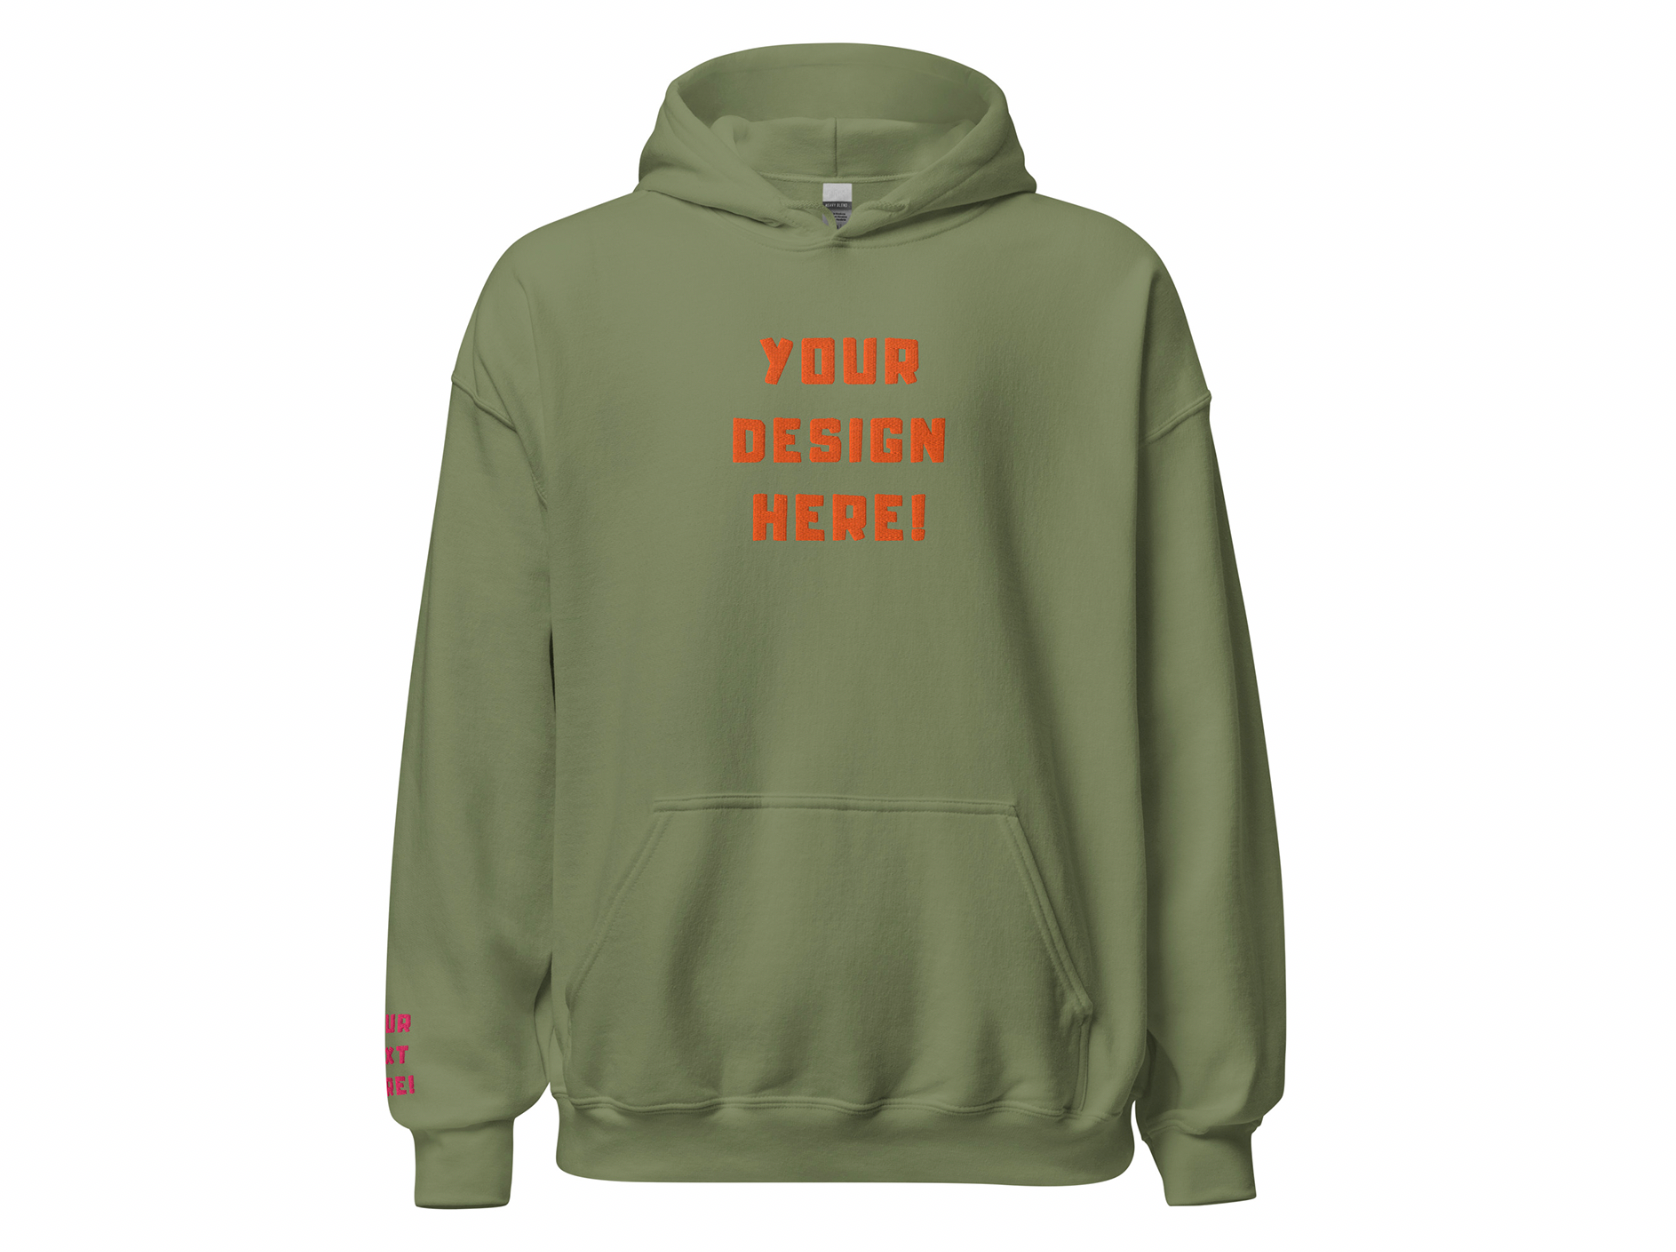 Custom adults embroidered military green hoodie. Sleeve text is customizable. 